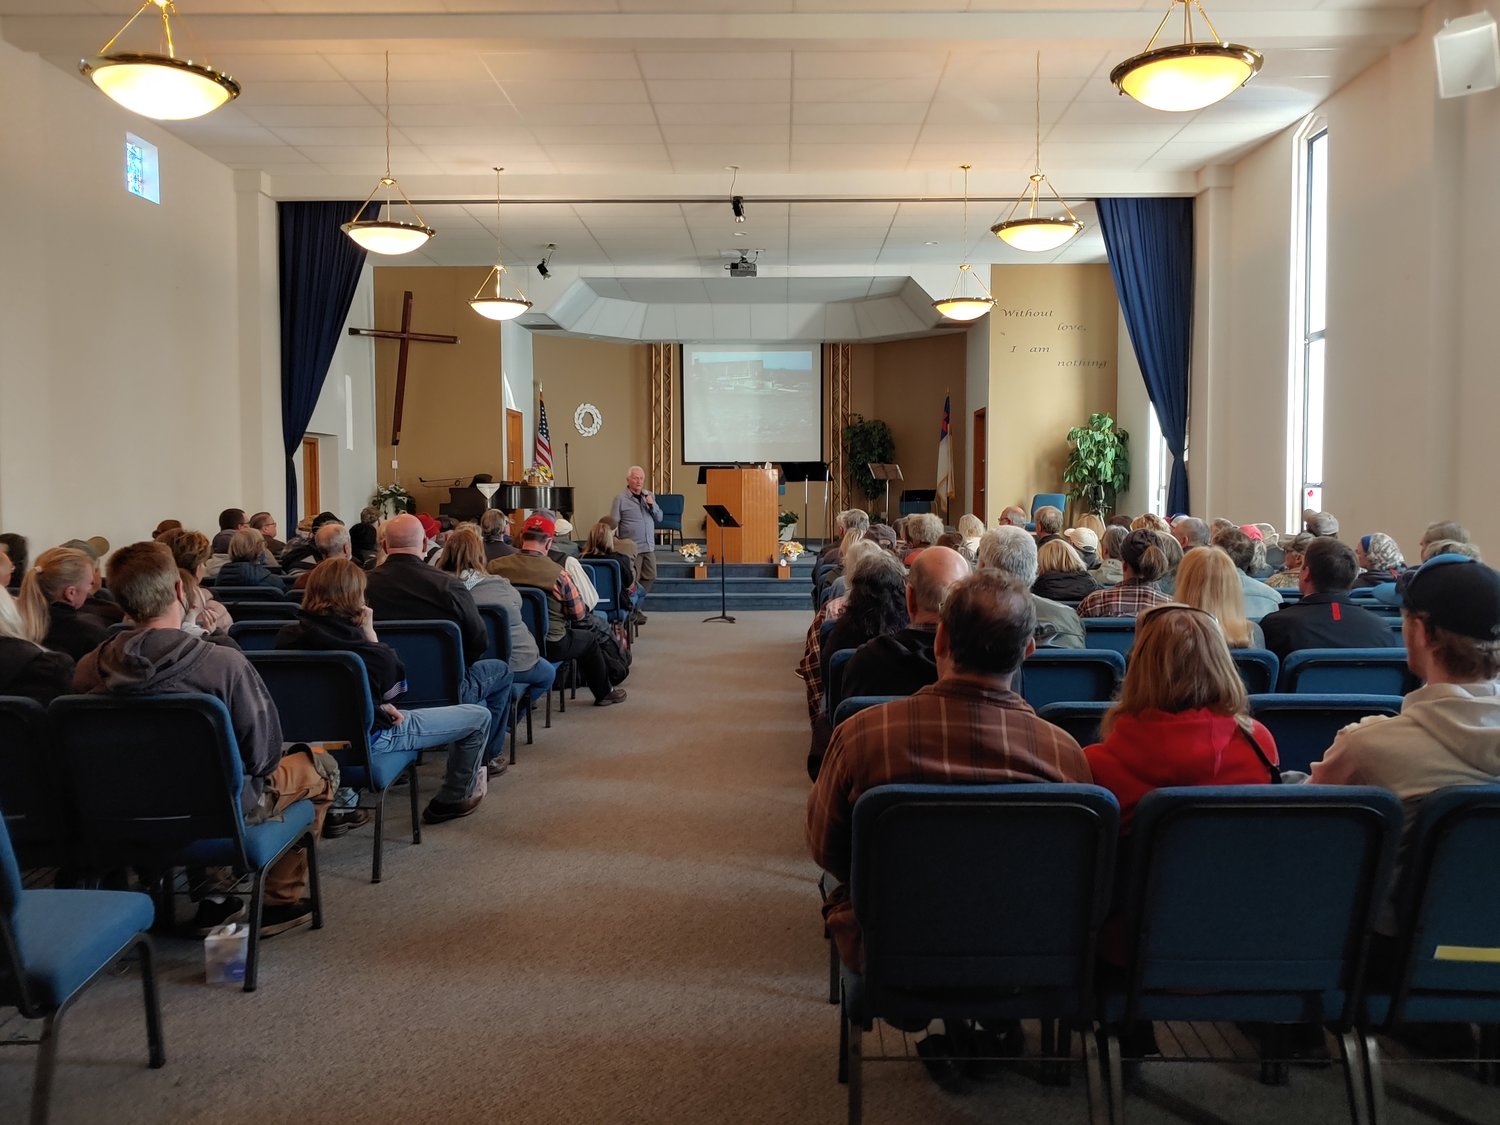 On Sunday afternoon, for the second week in a row, dozens of people crowded into a room — this time New Life Assembly of God Church in Toledo — to learn about the dangers of biosludge.